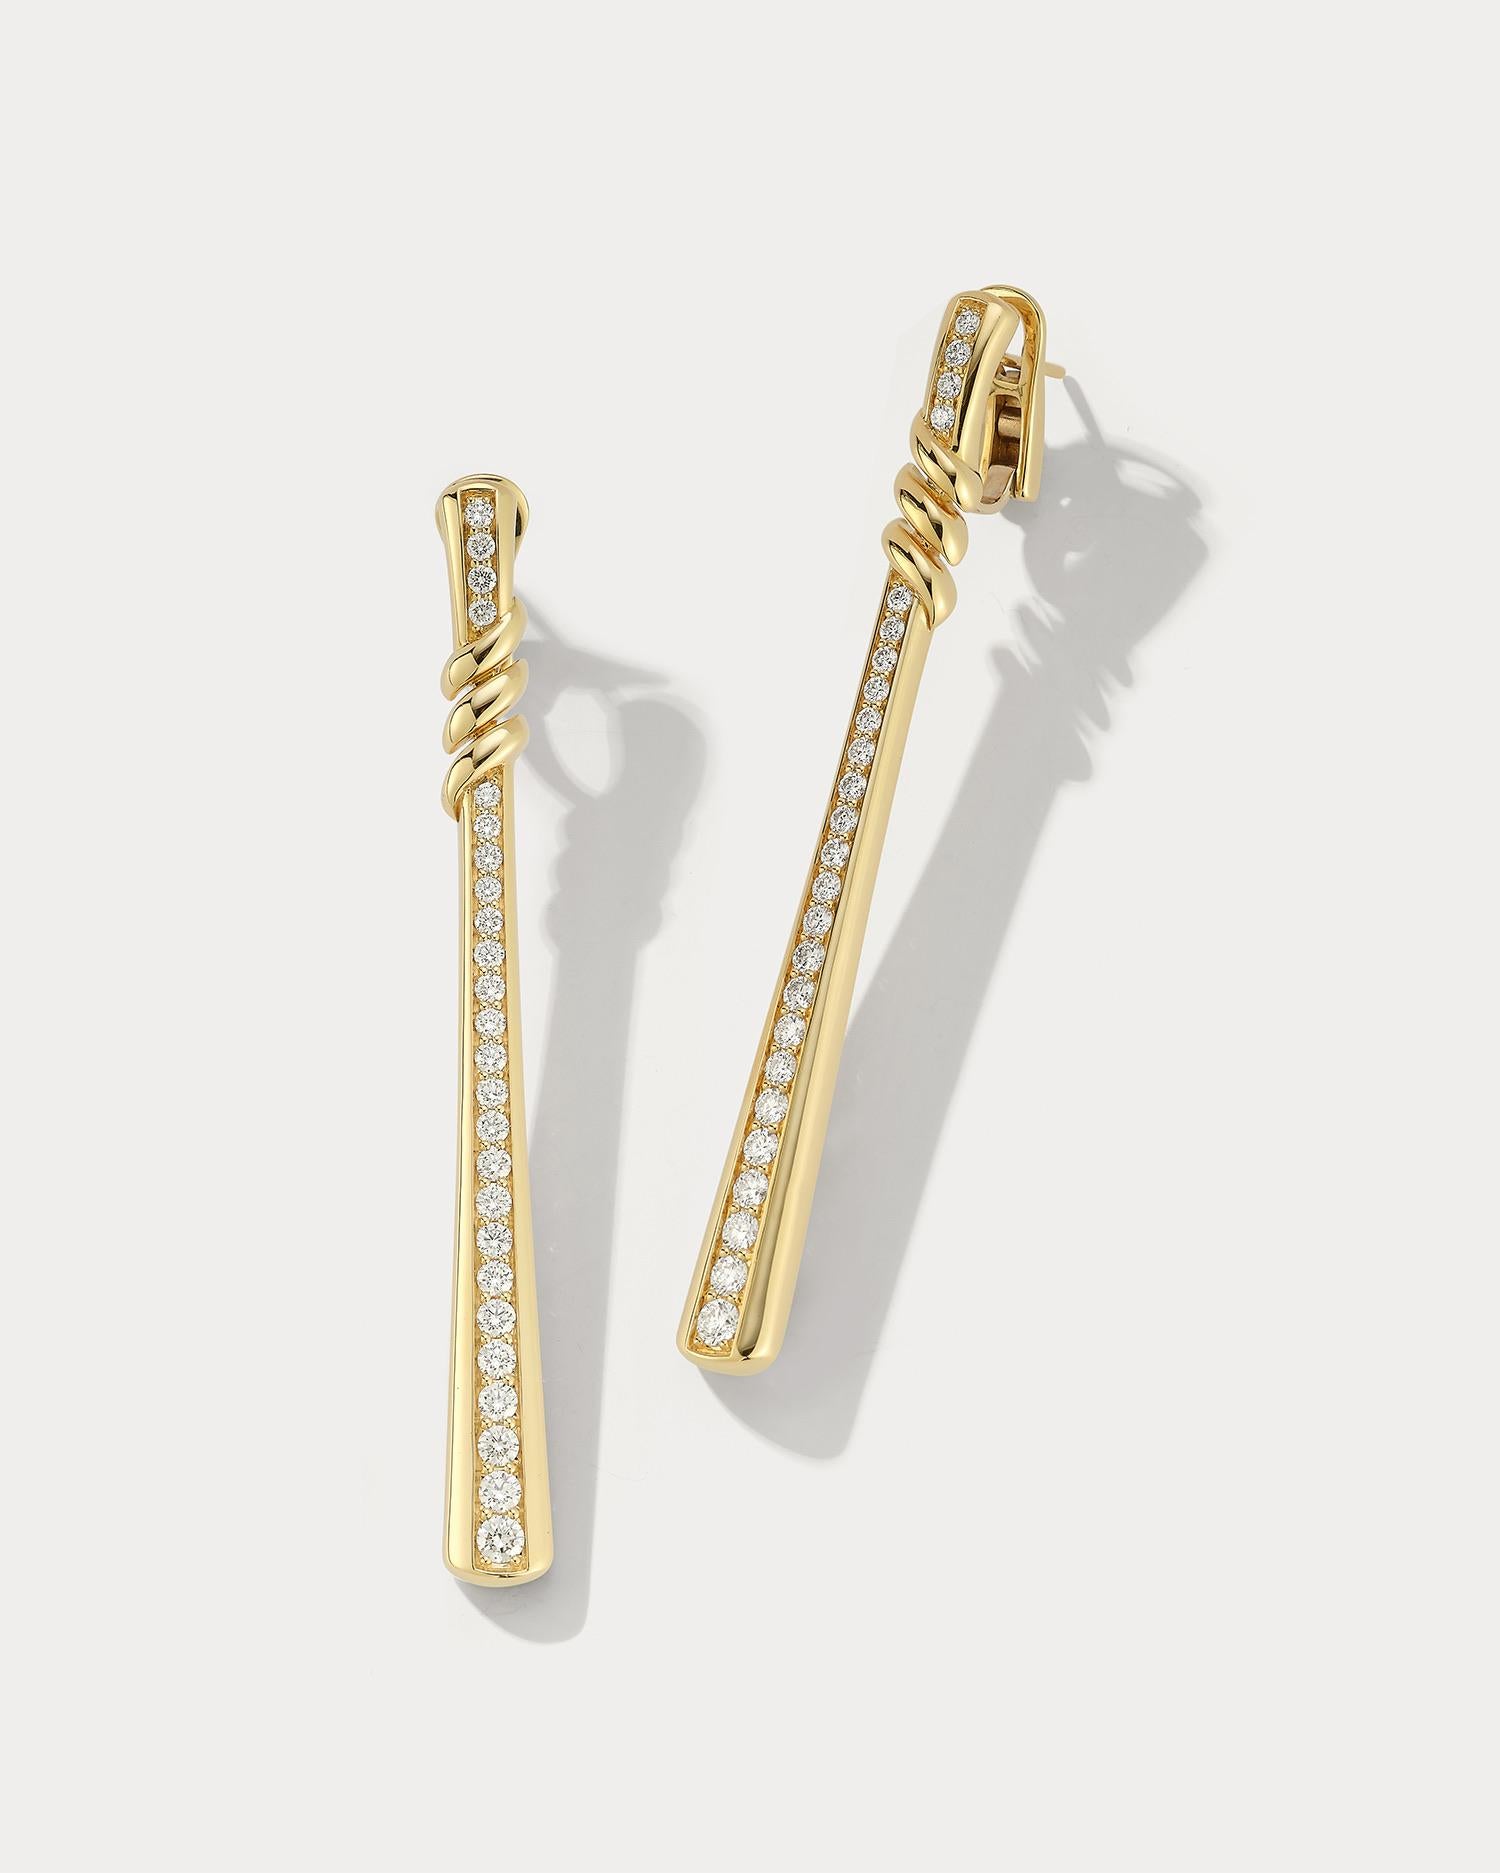 These Yellow Gold and Diamond drop earrings are a perfect balance of elegance and sophistication. Crafted from 18k yellow gold, these earrings feature a stunning diamond studs at the top that is attached to a delicate chain, ending with a single